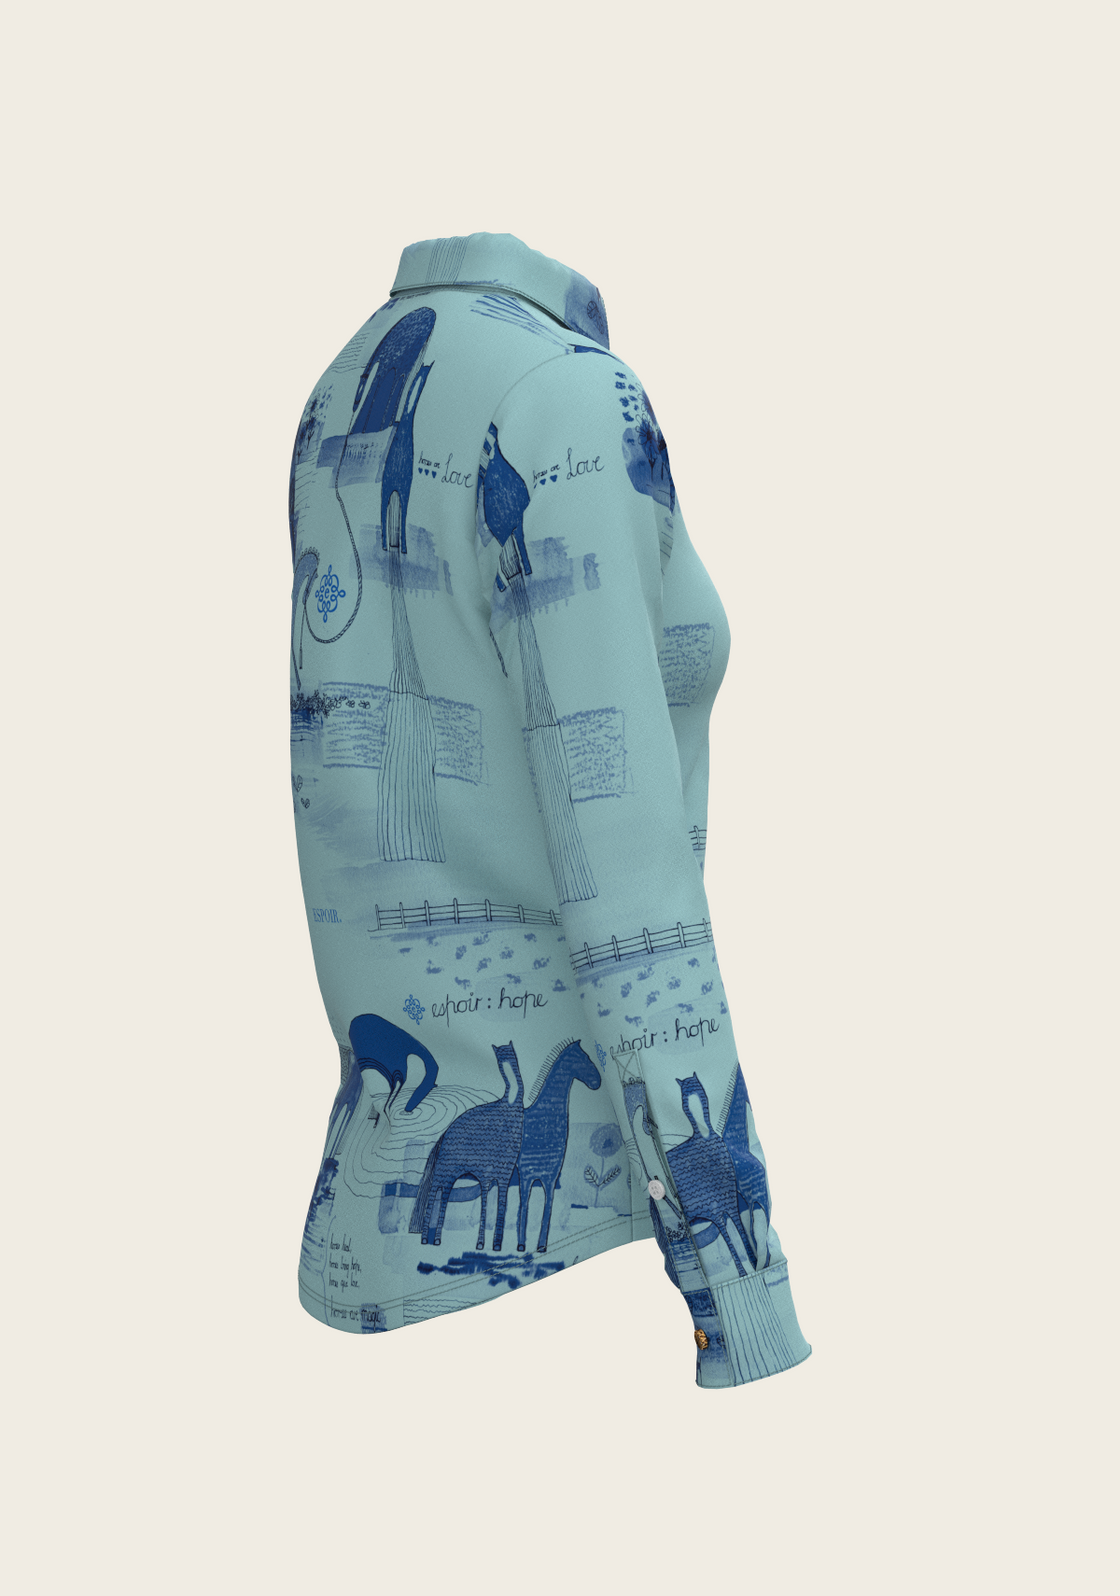 Daydreaming Horses in Blue Ladies Button Shirt